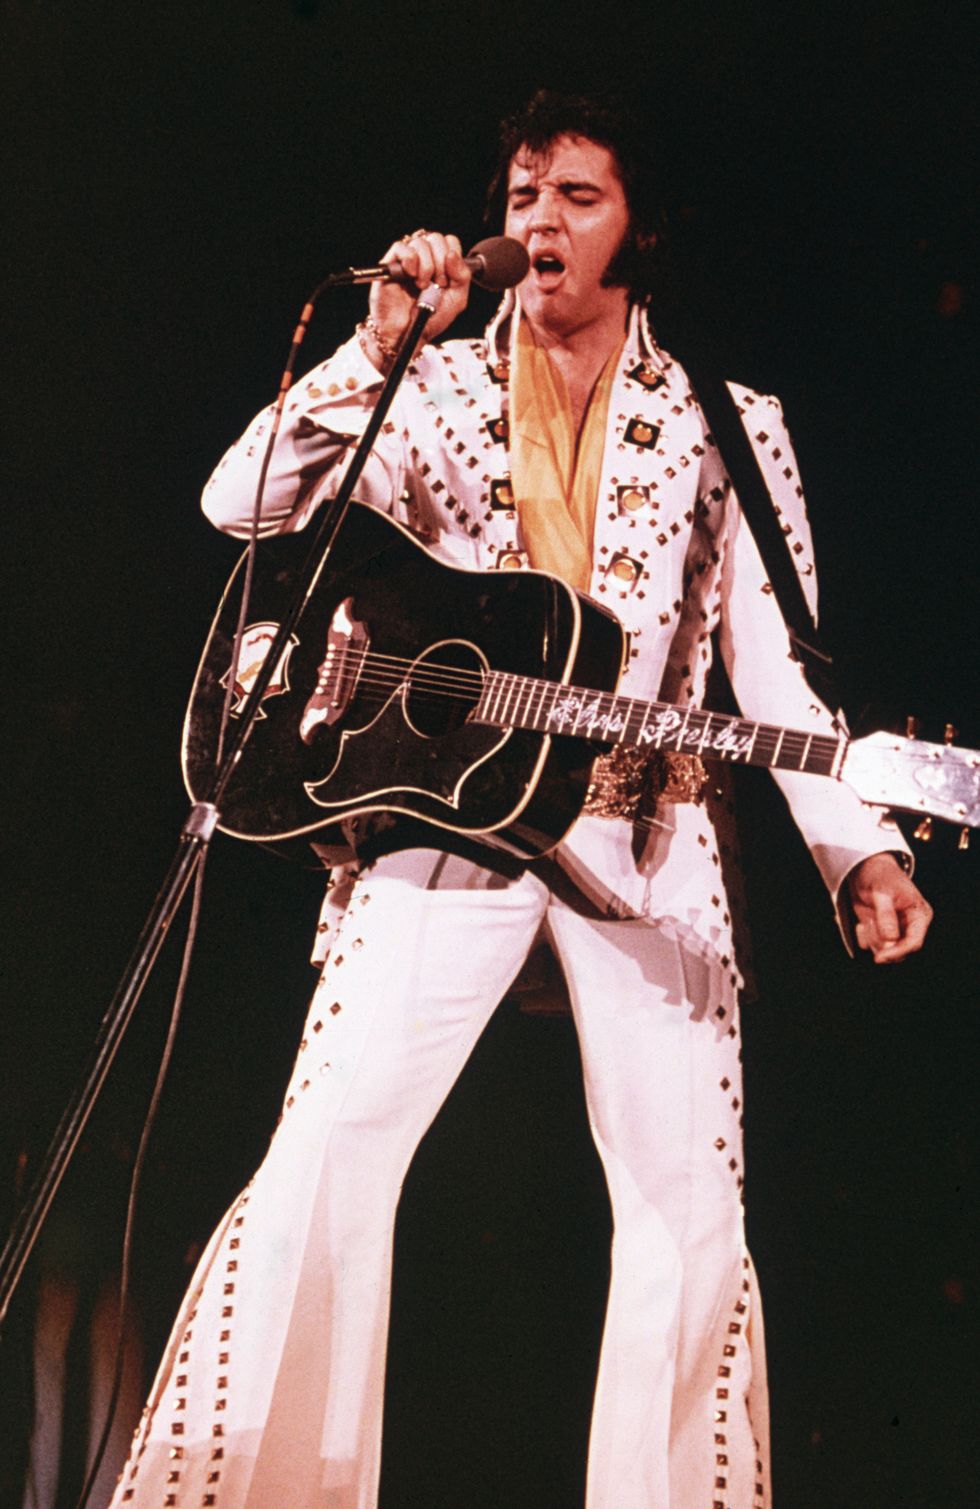 circa 1975  american rock singer elvis presley 1935   1977, wearing a white rhinestone studded suit and strapped guitar, singing into a microphone with his eyes closed  photo by fotos internationalgetty images